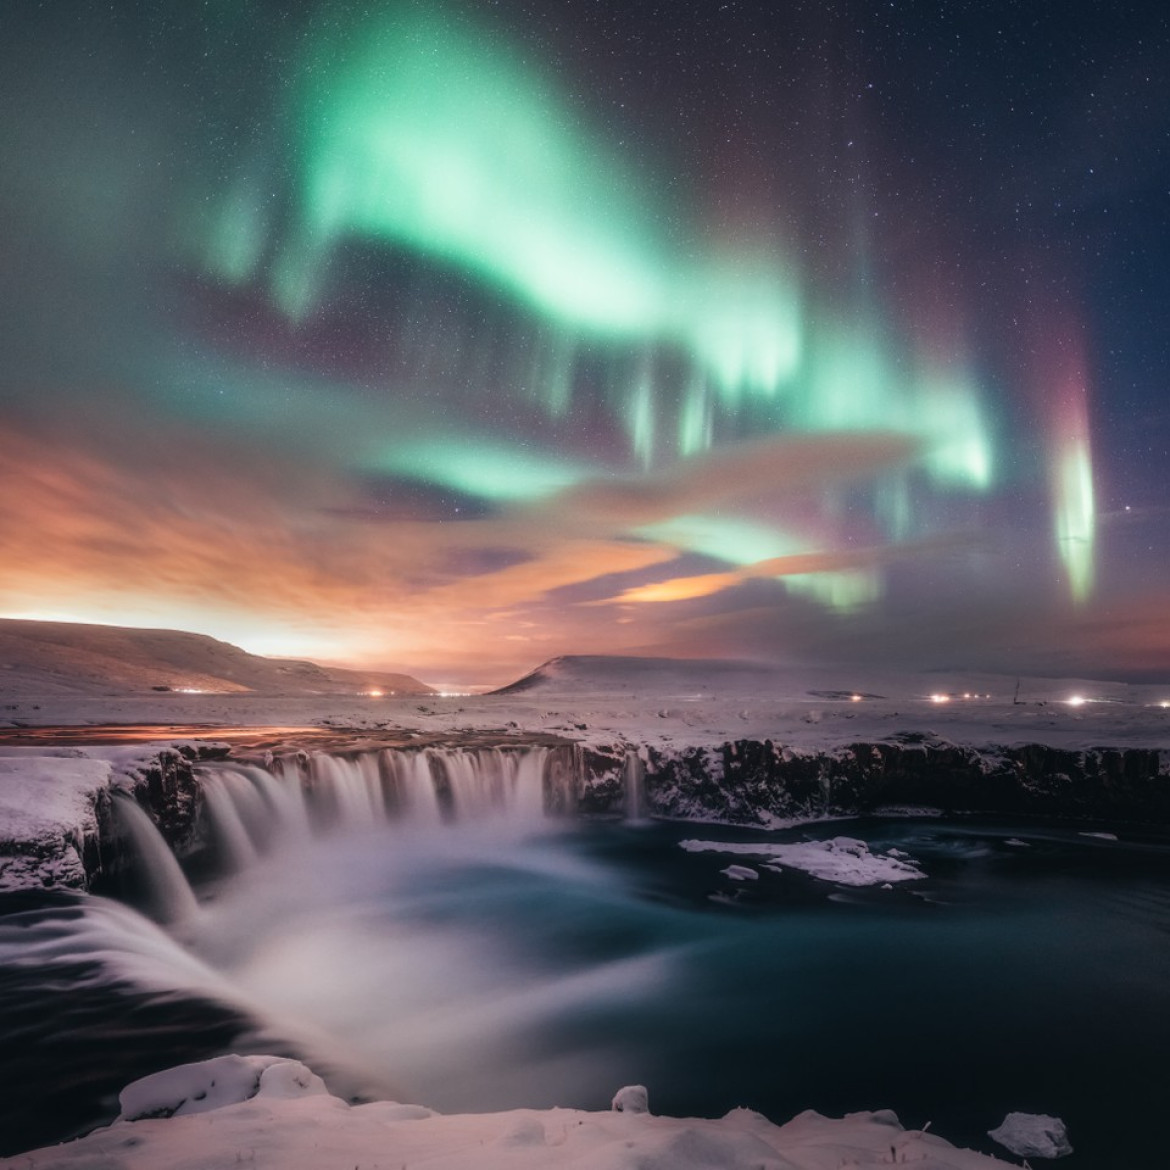 fot. Sutie Yang, "Dancing in the Gooafoss" / Insight Investment Astronomy Photographer of the Year 2019